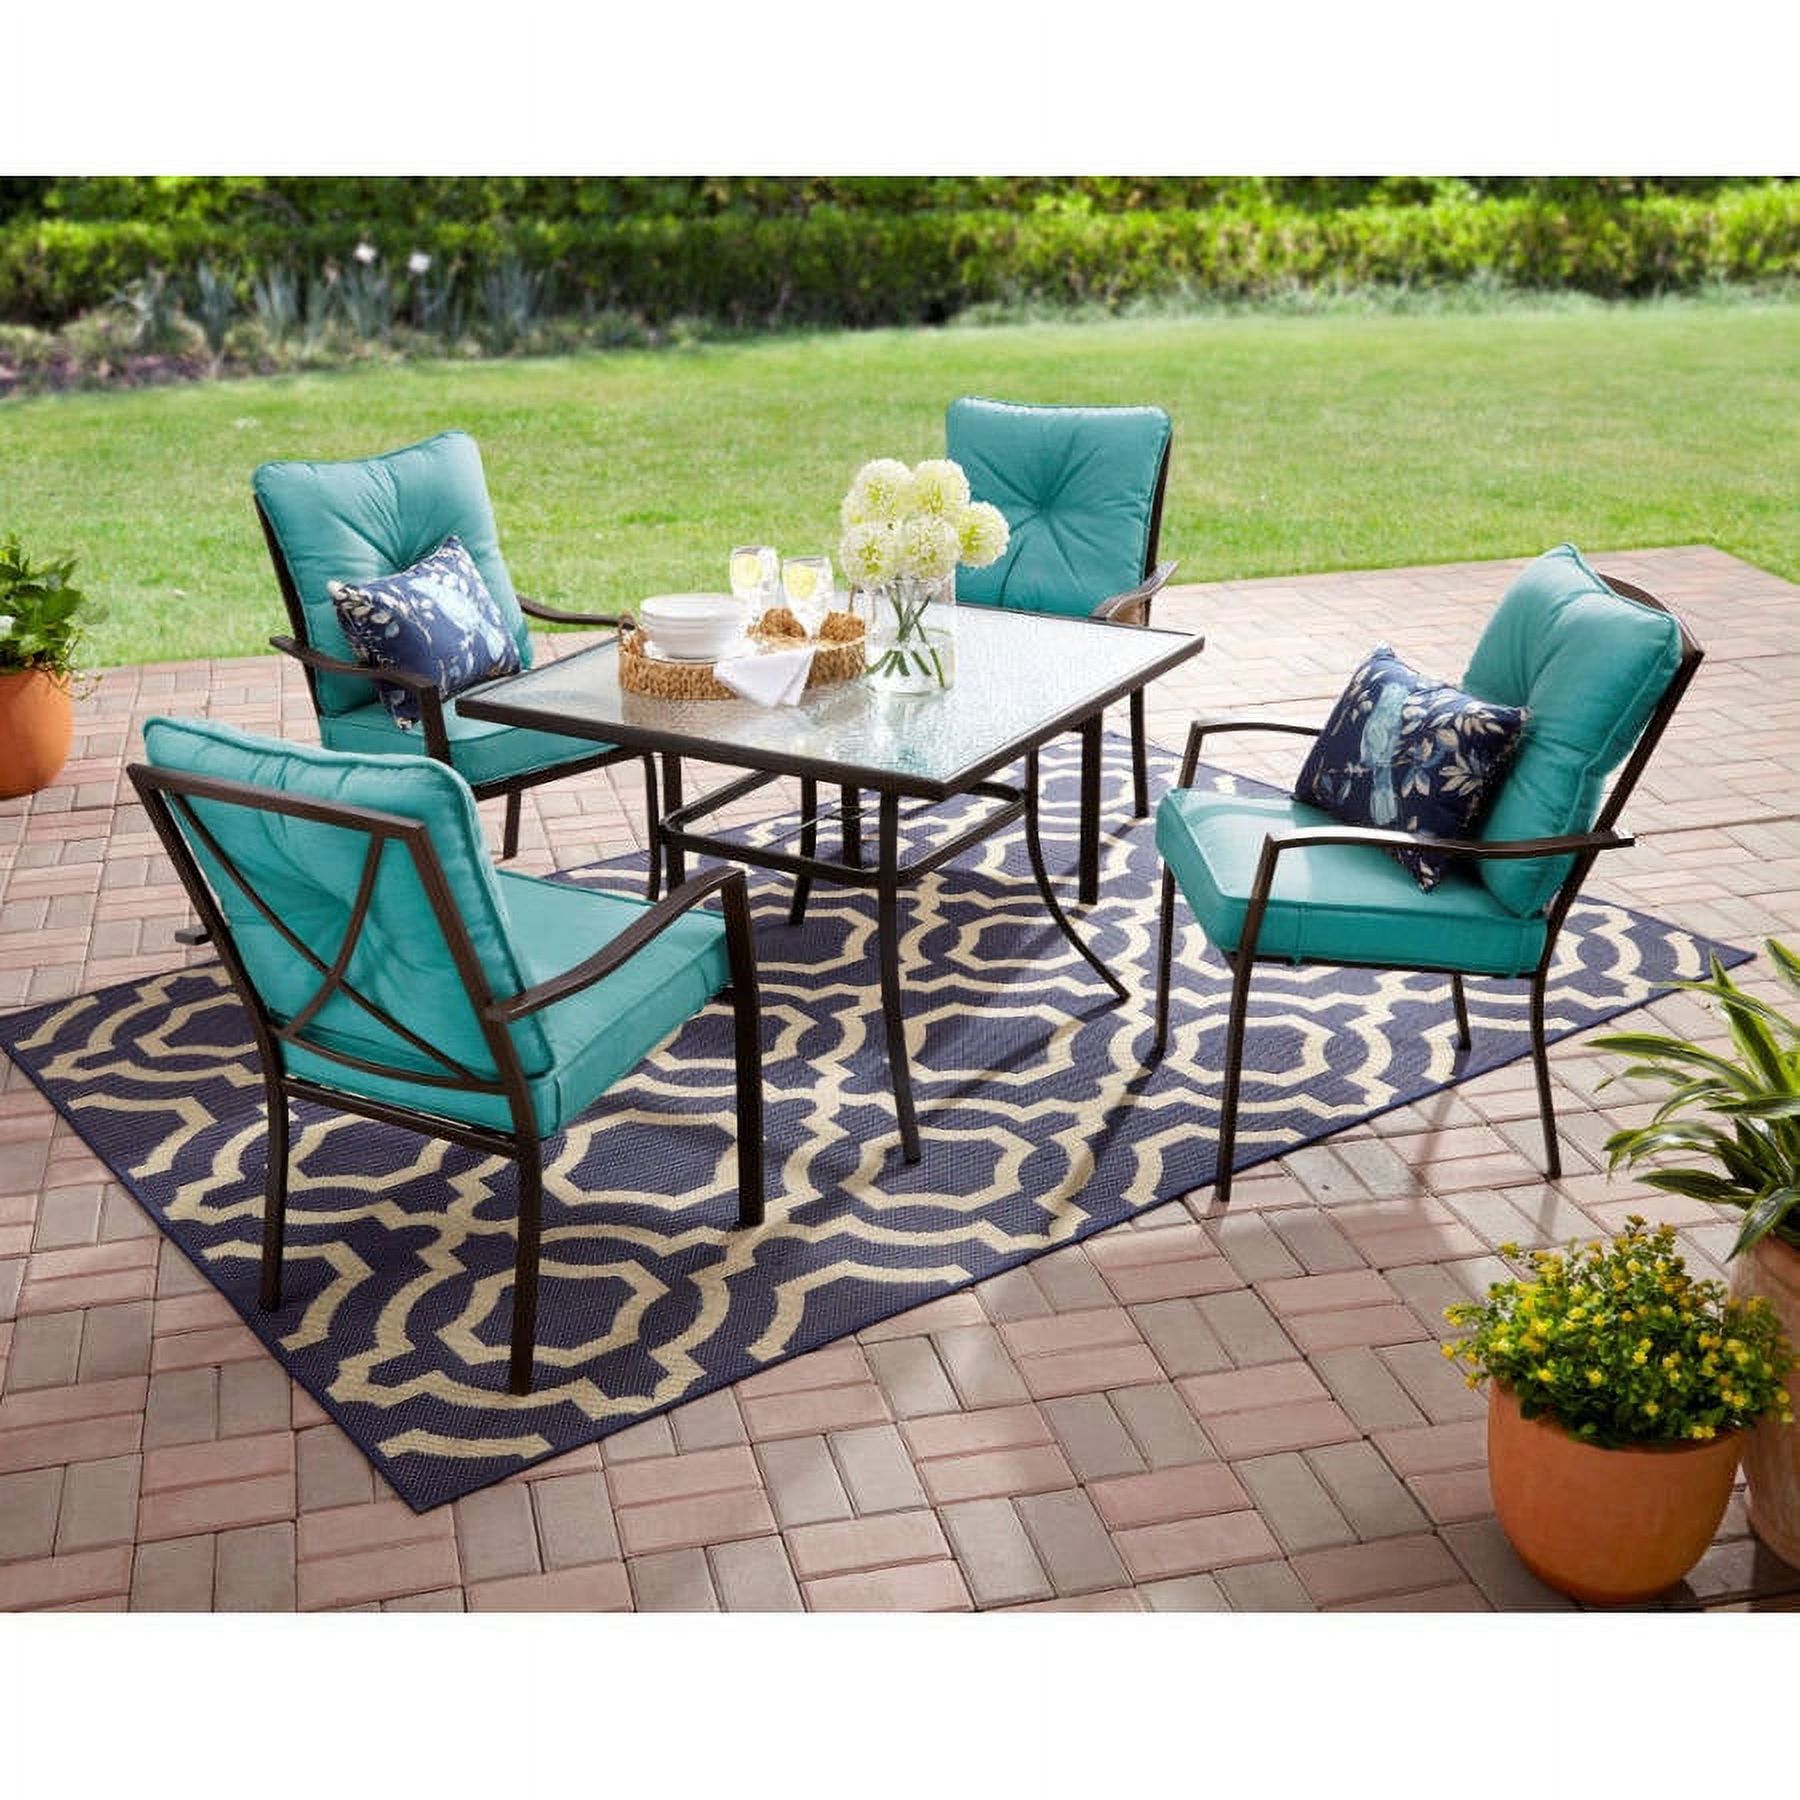 Mainstays Forest Hills Outdoor Patio Dining Set, Cushioned Metal 5 Piece, Teal - image 1 of 13